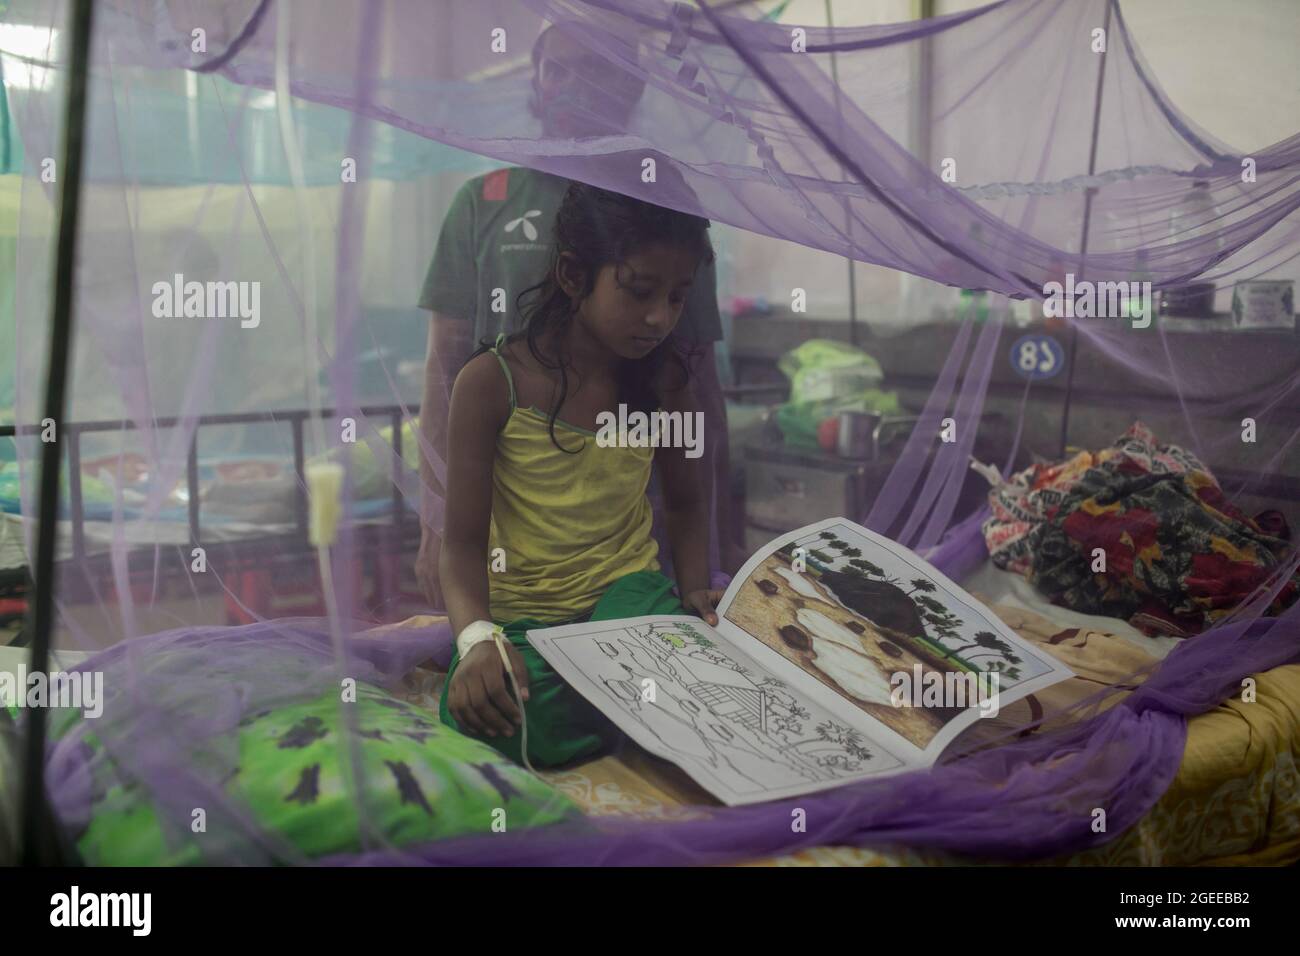 A child seen drawing cartoons inside a mosquito net during daytime at Children's Hospital.With Bangladesh grappling with the Covid-19 pandemic, dengue poses a great threat to the country's children. At present, severe dengue affects most Asian countries and has become a leading cause of hospitalizations and deaths among children as well as adults in these regions, according to WHO. In such dire circumstances, some Dhaka residents are lighting mosquito-repelling incenses even during the day to steer clear of the mosquito-borne viral disease. Stock Photo